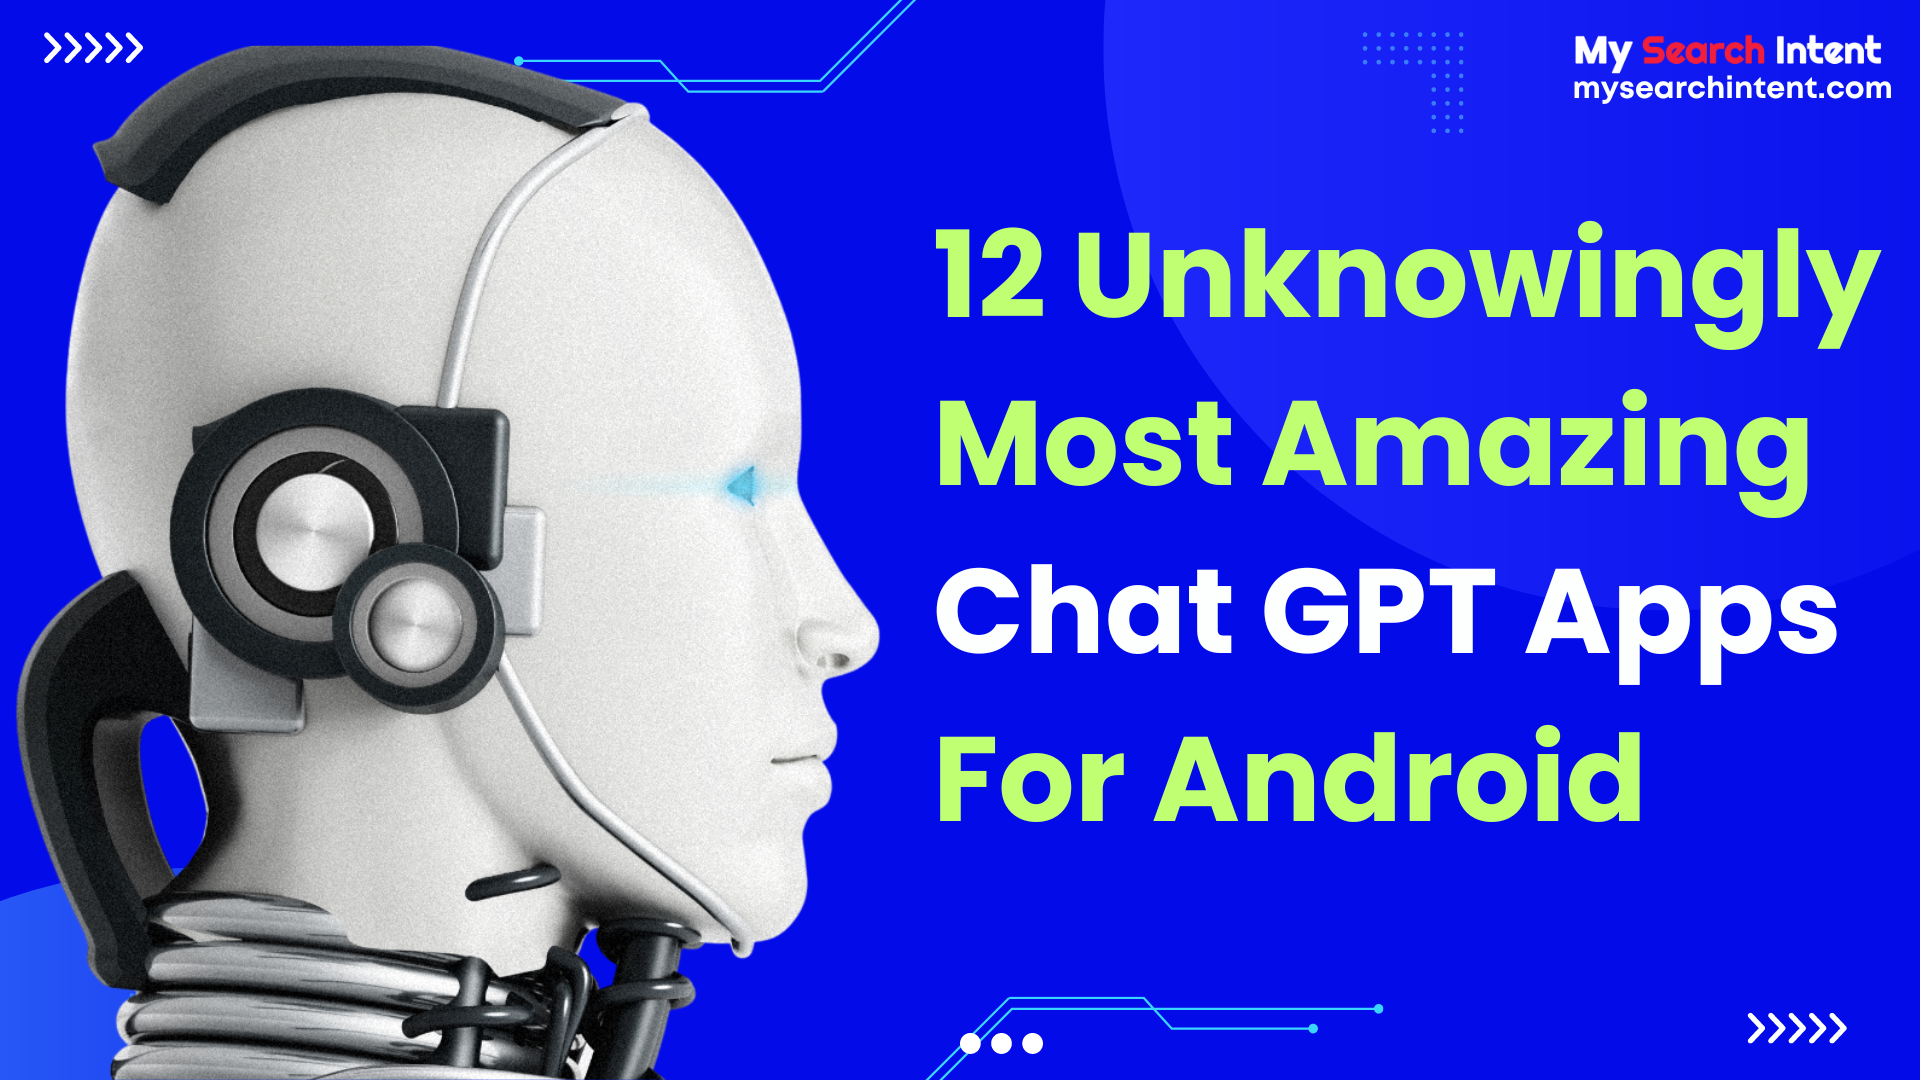 chat gpt apps for android